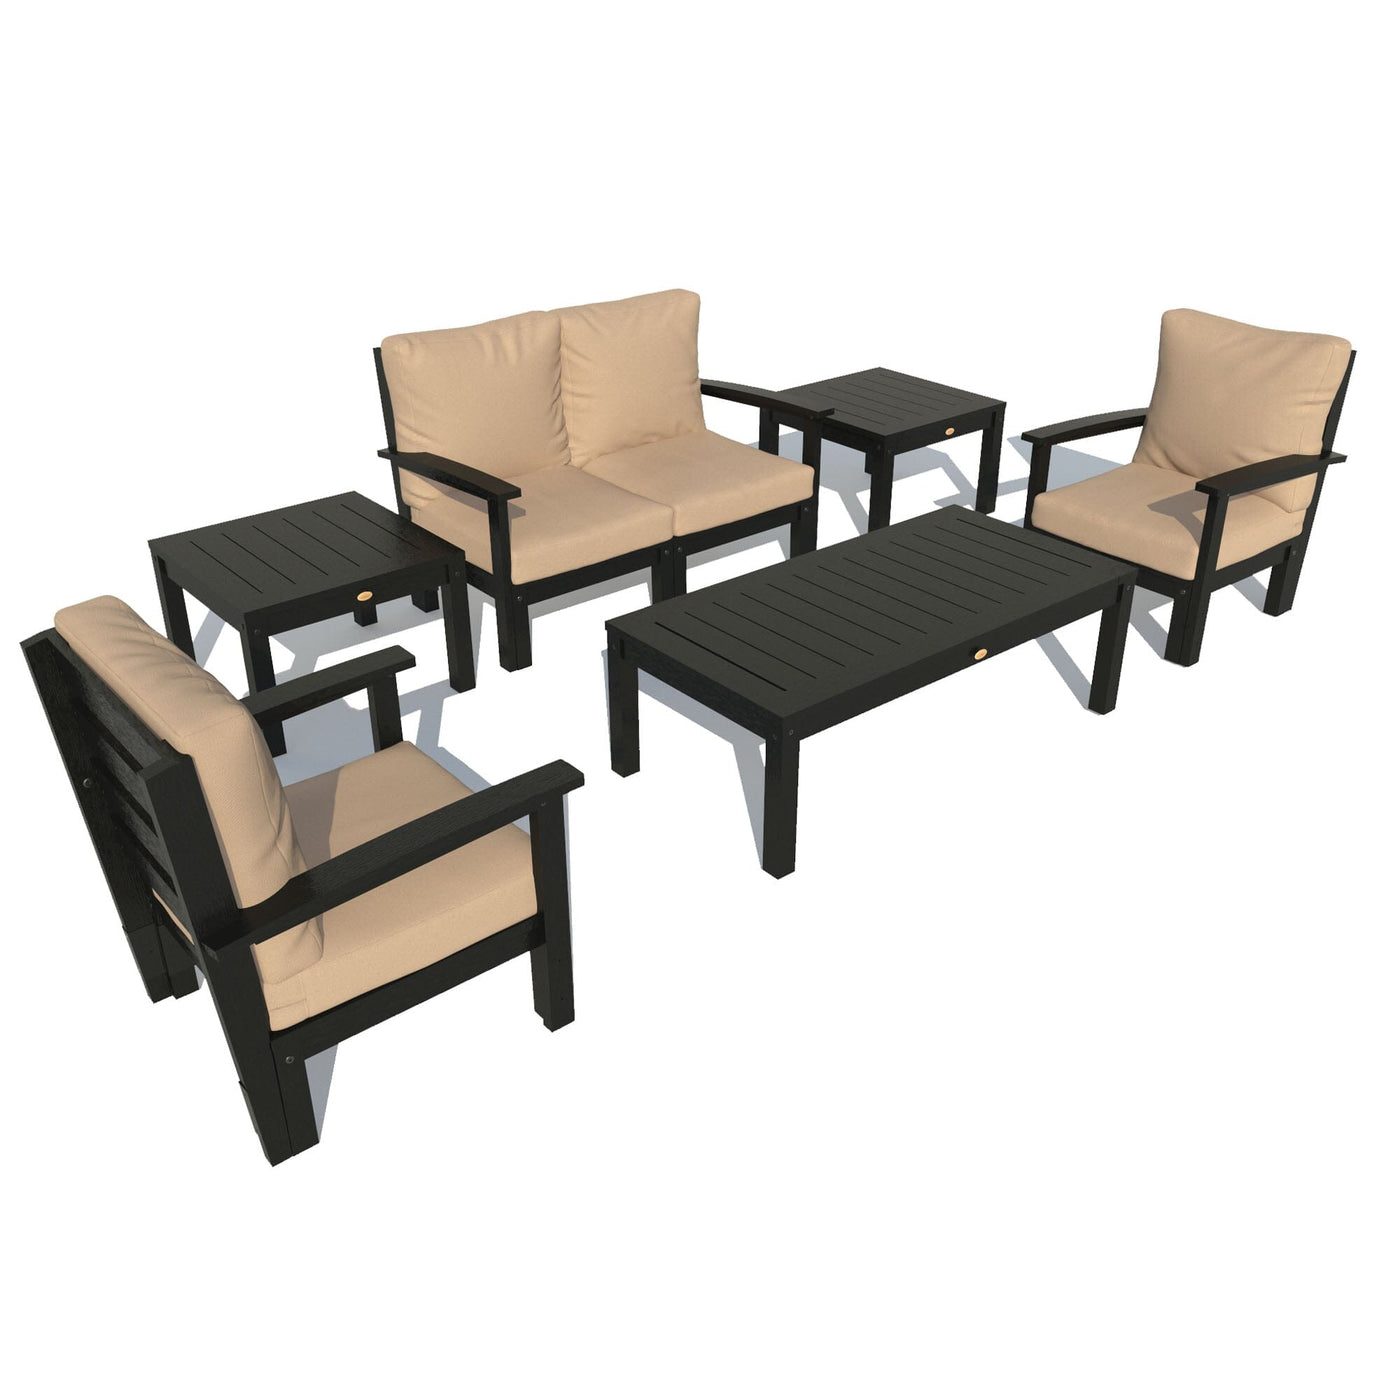 Bespoke Deep Seating: Loveseat, Set of 2 Chairs, Conversation Table, and 2 Side Tables Deep Seating Highwood USA Dune Black 